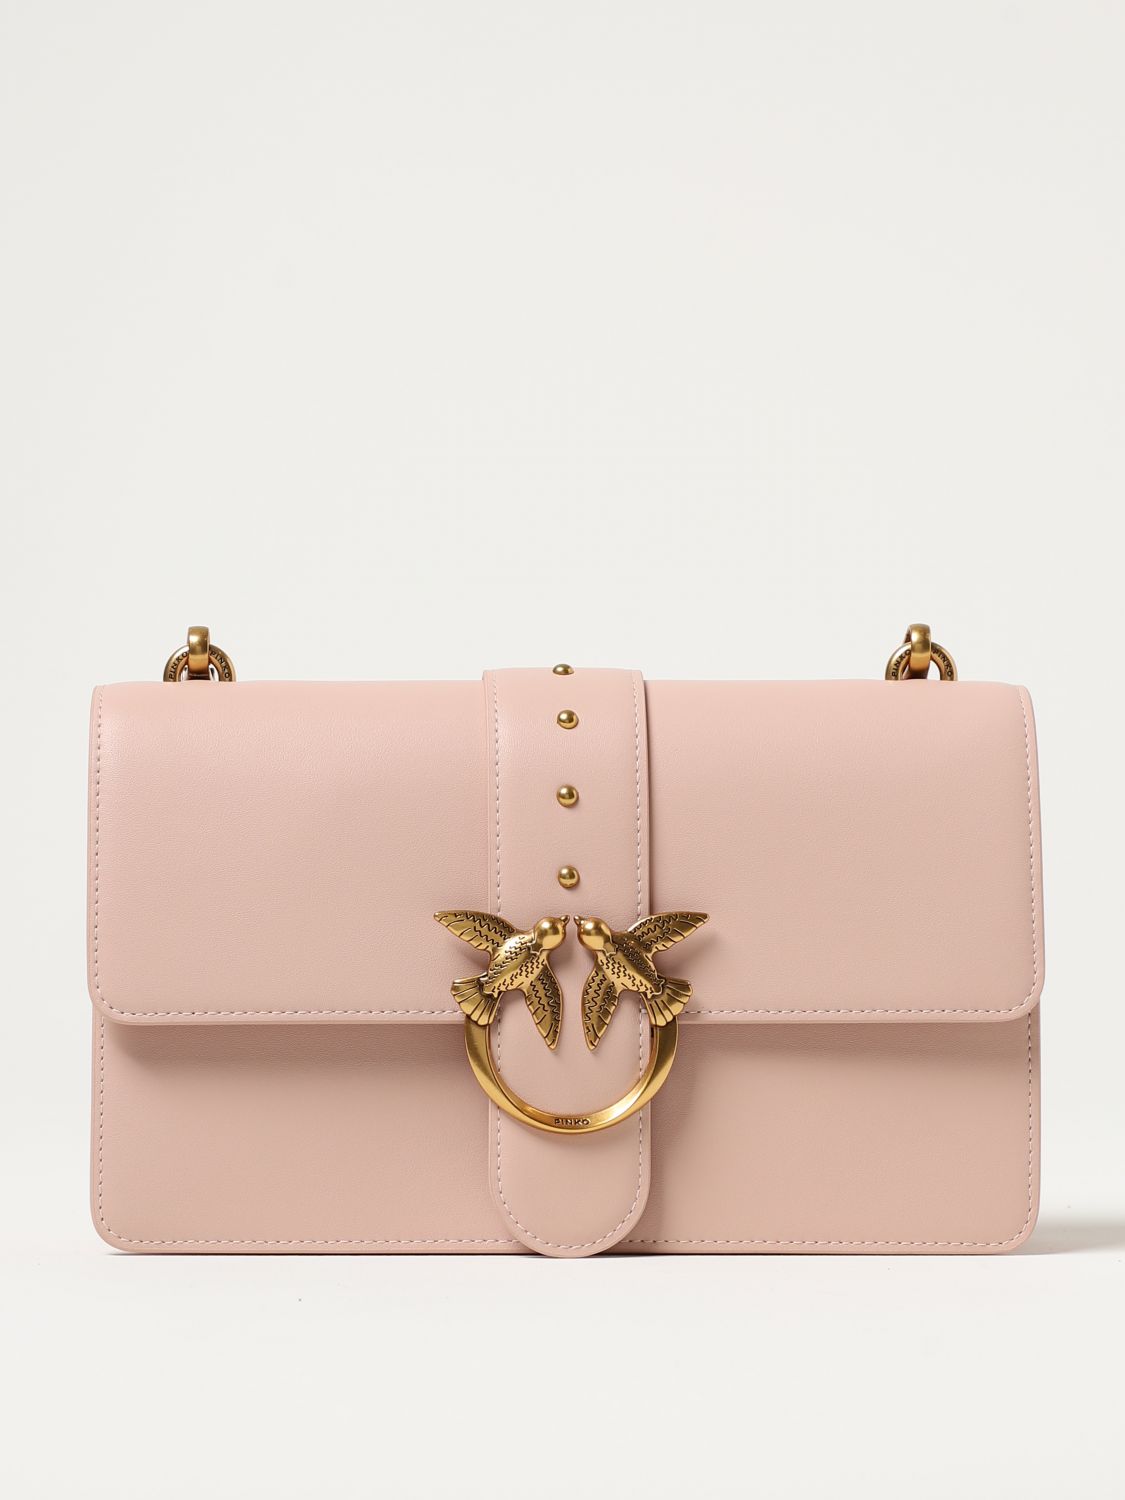 Pinko Love One Bag In Leather In Blush Pink